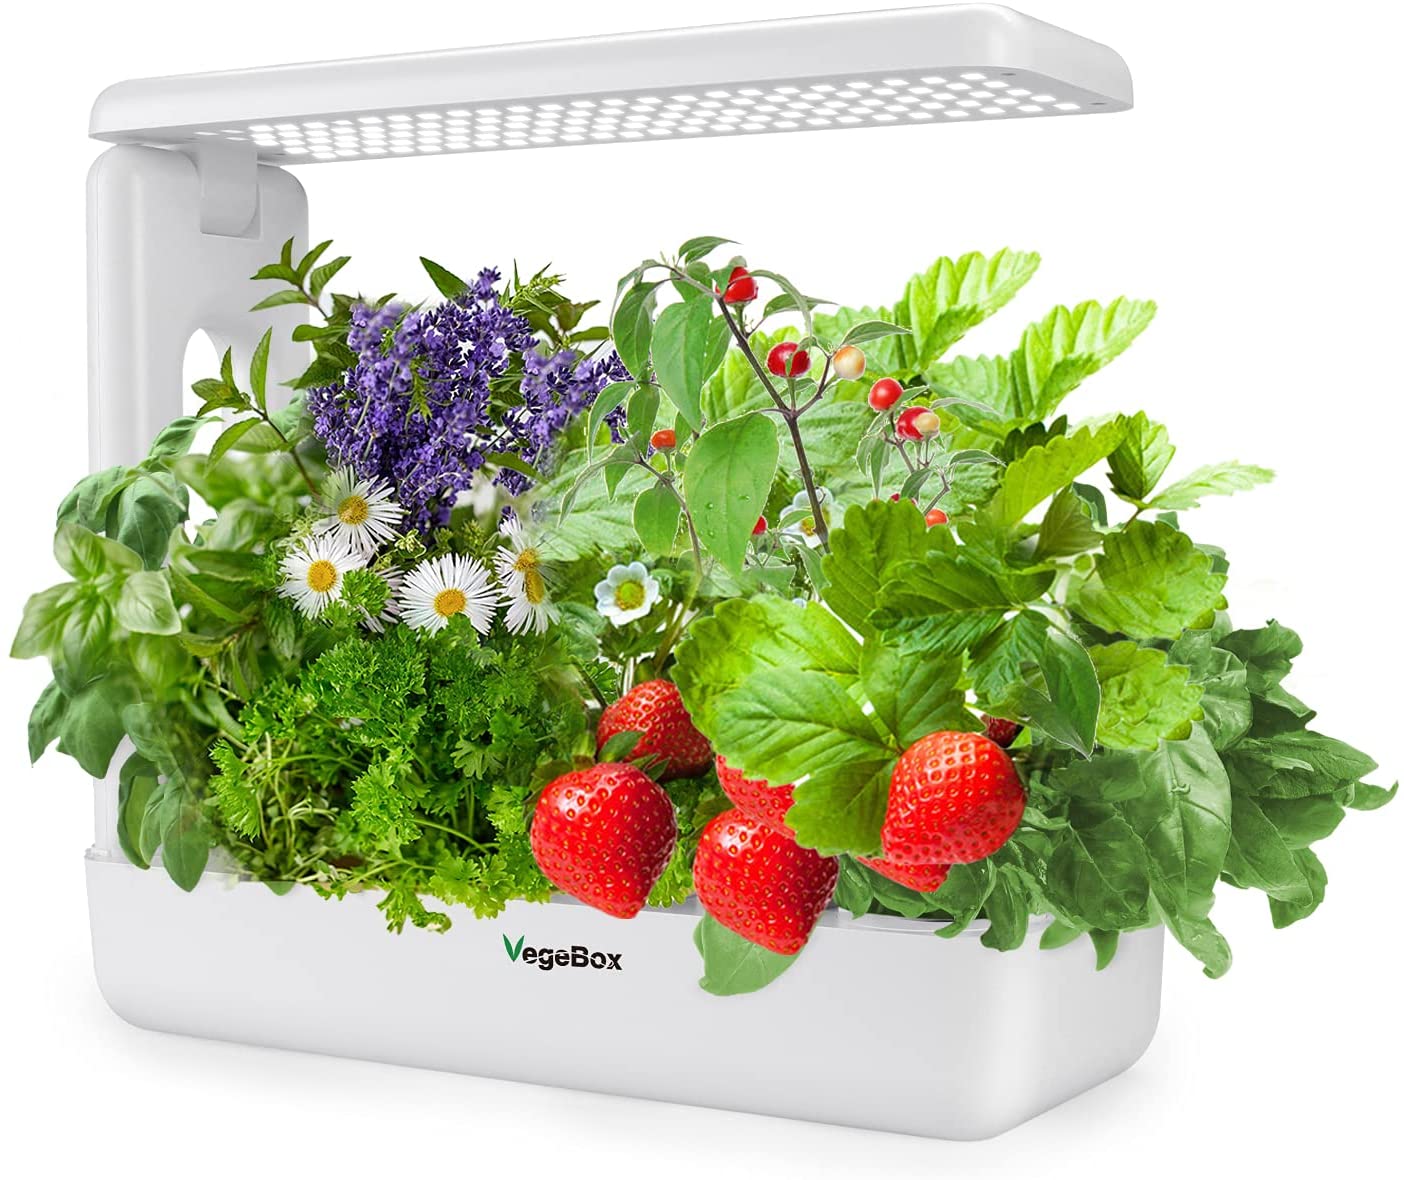 VegeBox Large Indoor Hydroponic Growing System, 12-Pod